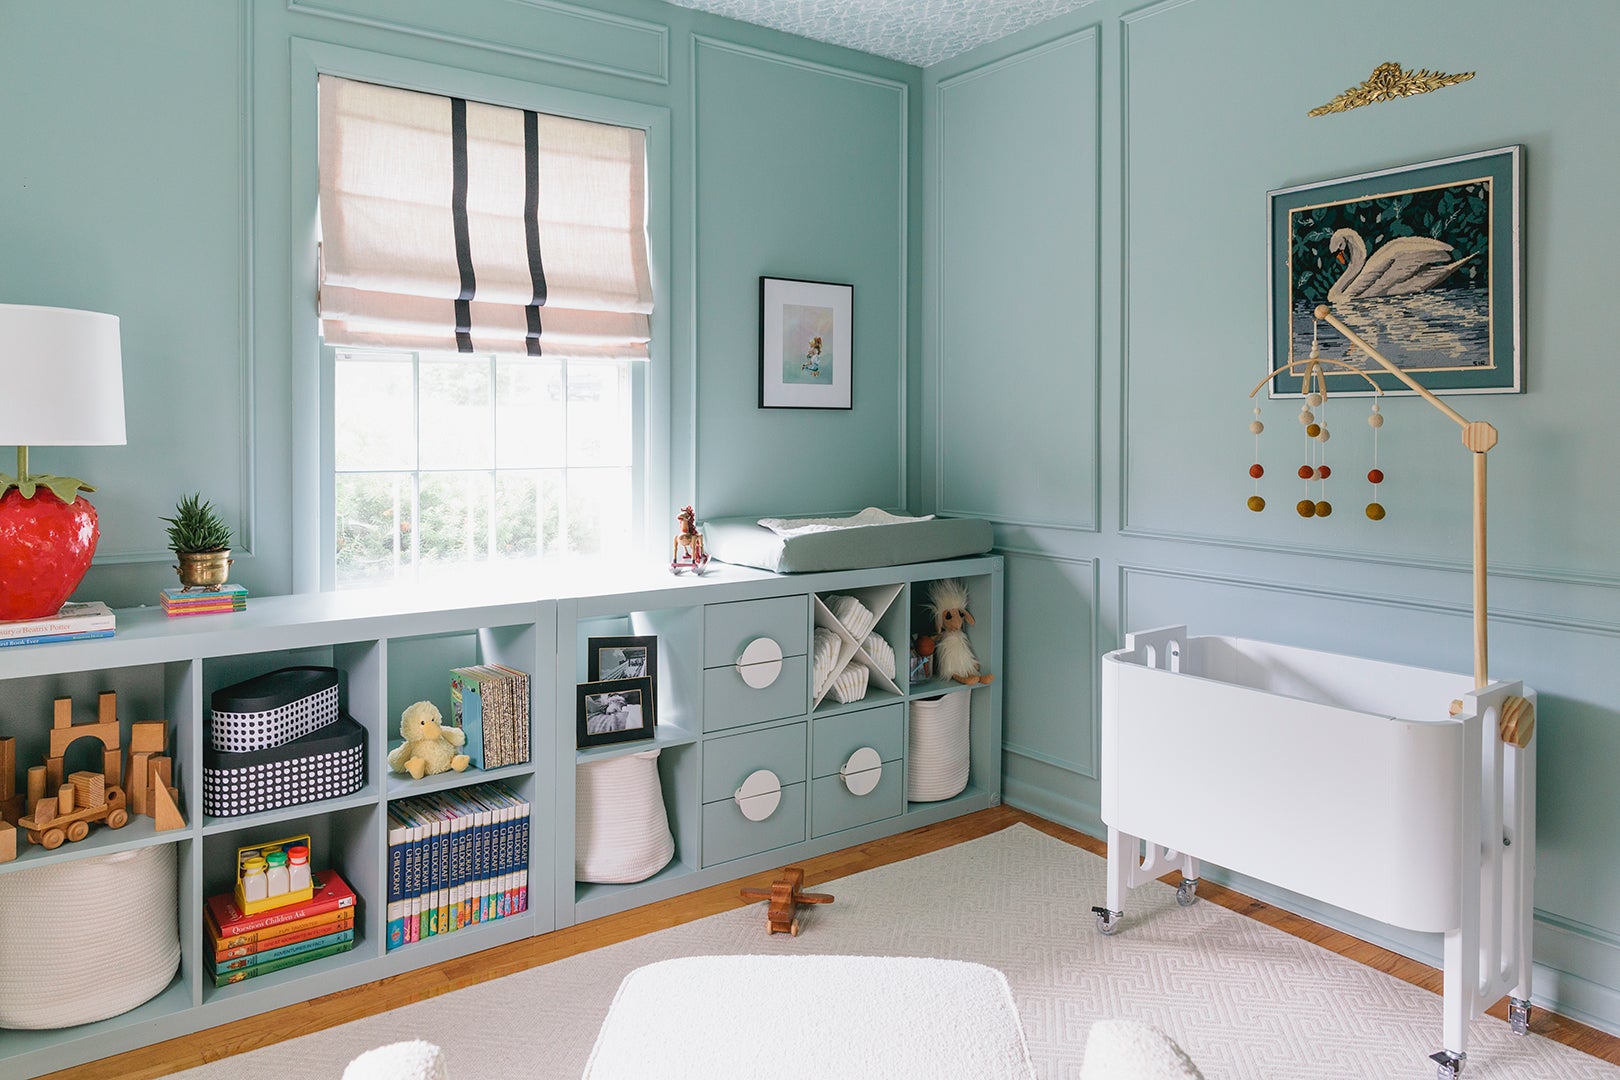 This Designer Broke All the Rules Decorating Her Robin’s-Egg Blue “Un-Nursery”